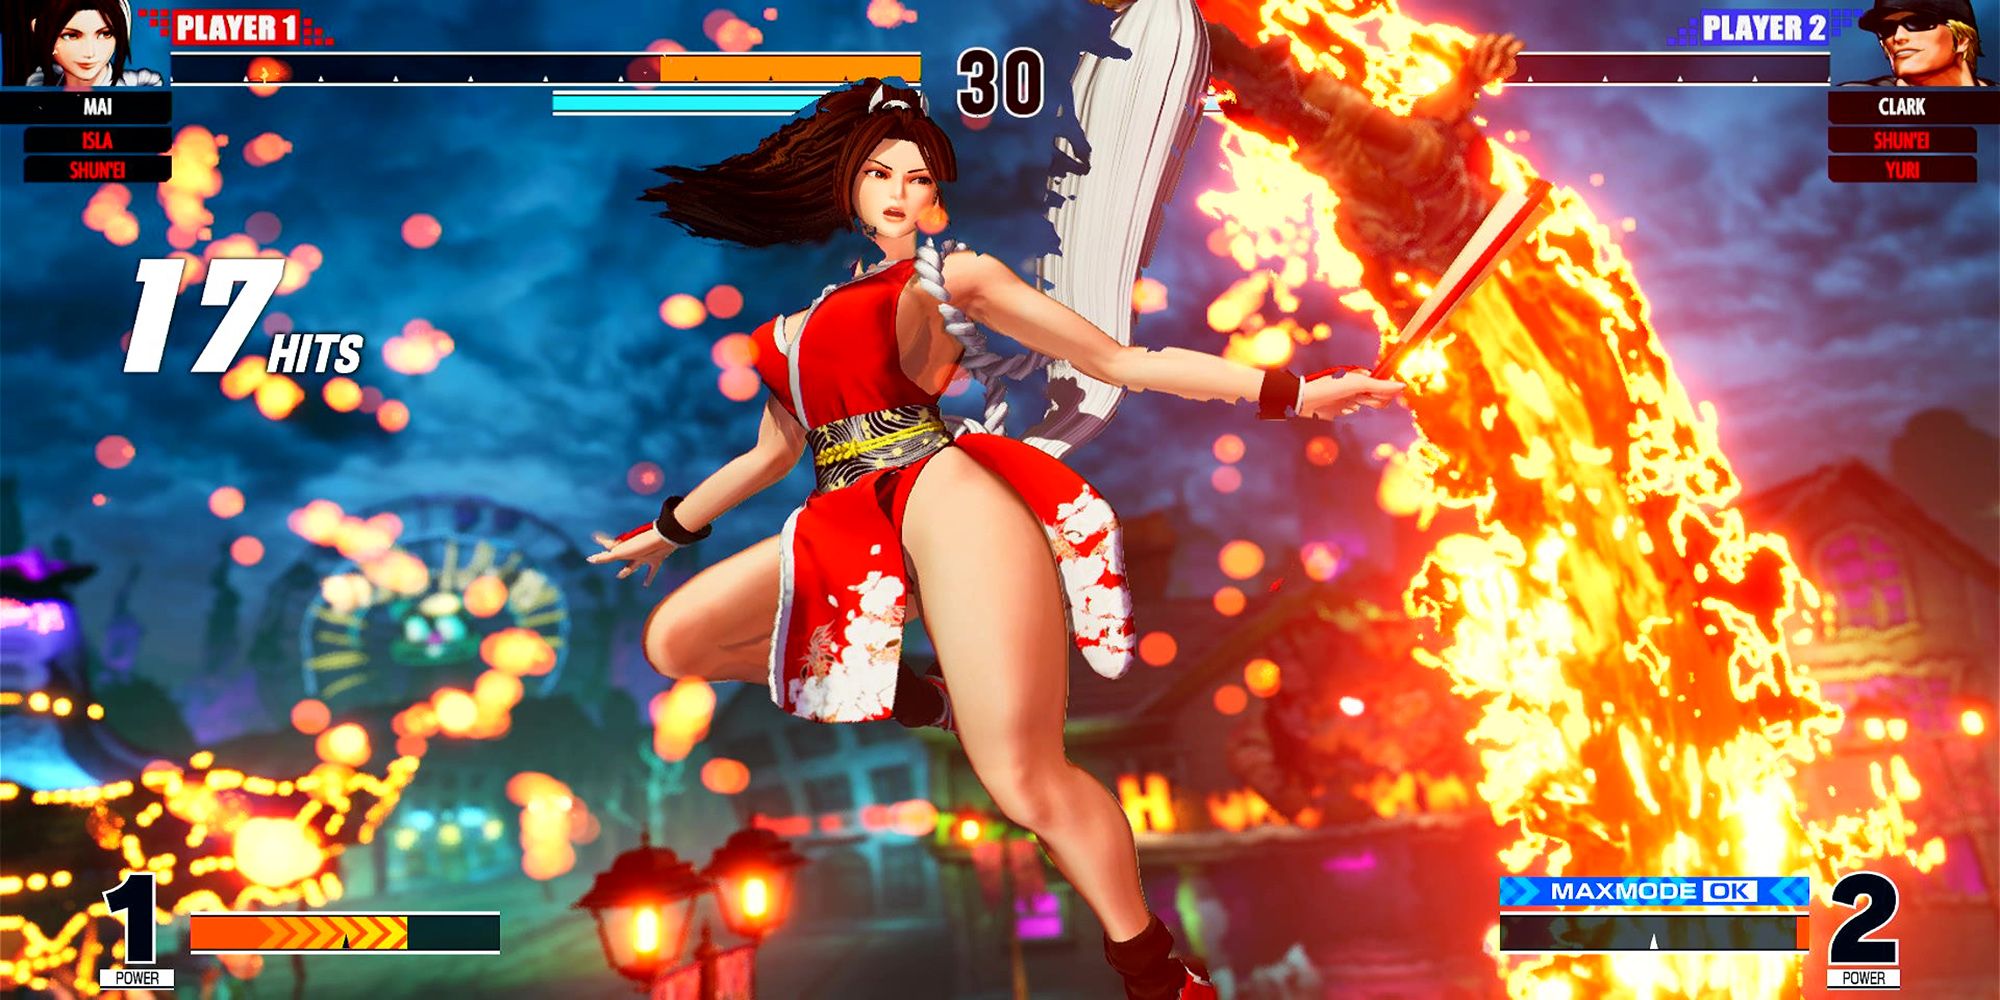 Mai soars through the air of the abandoned amusement park after landing the Shiranui-Ryuu Ougi - Kuzunoha Climax Super Special Move in The King Of Fighters 15.